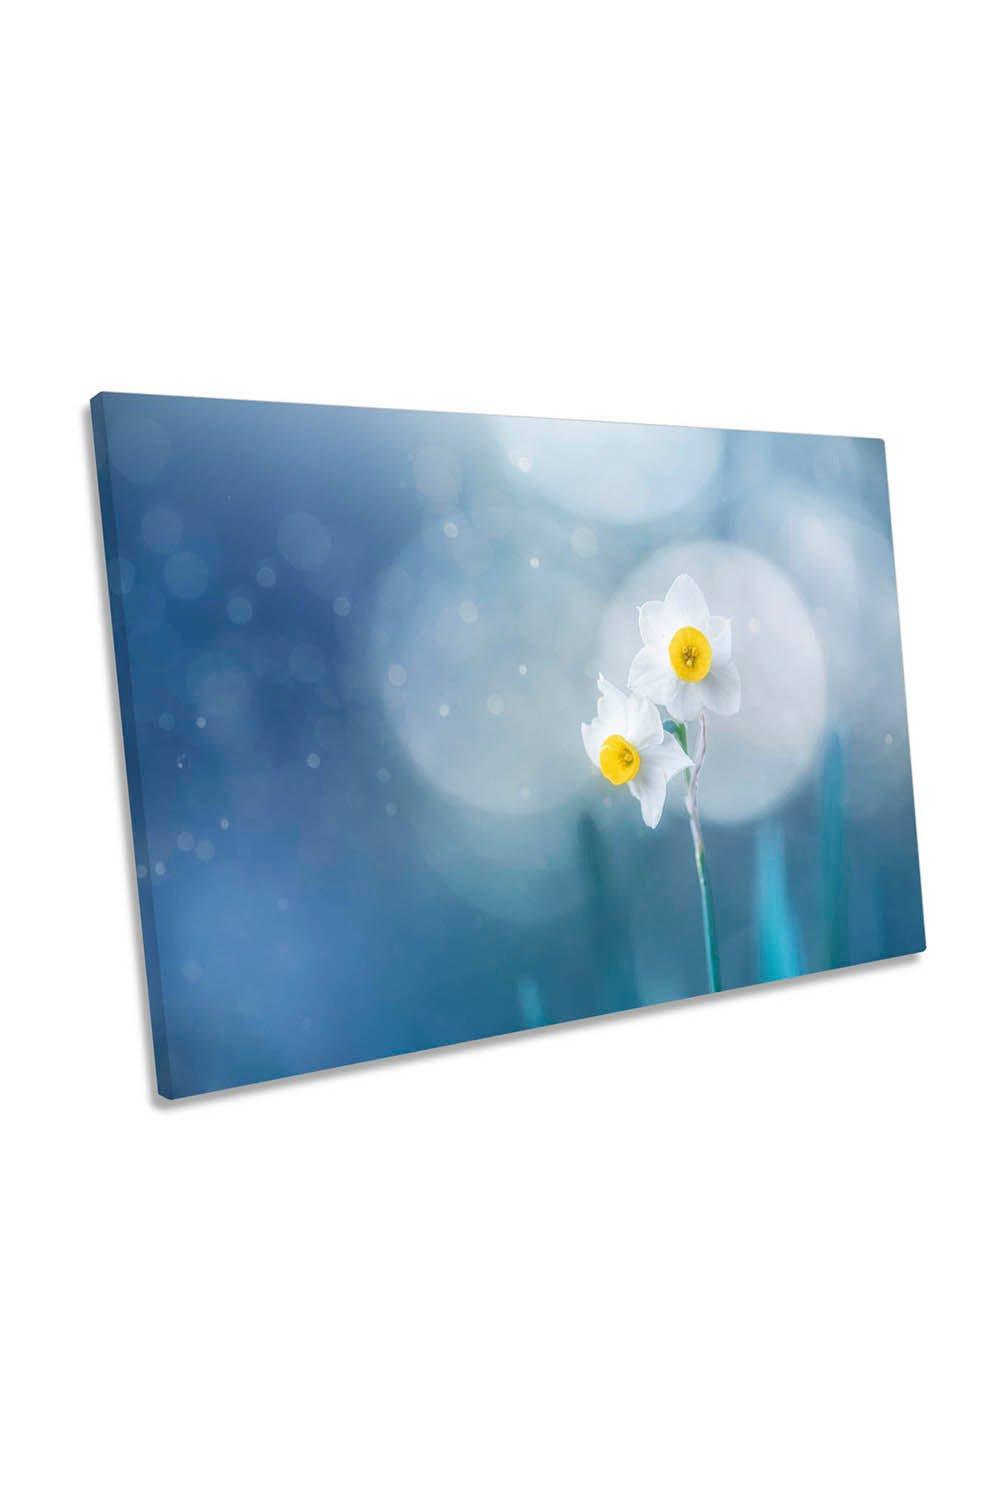 Spirit of the Moment Blue Flowers Floral Canvas Wall Art Picture Print